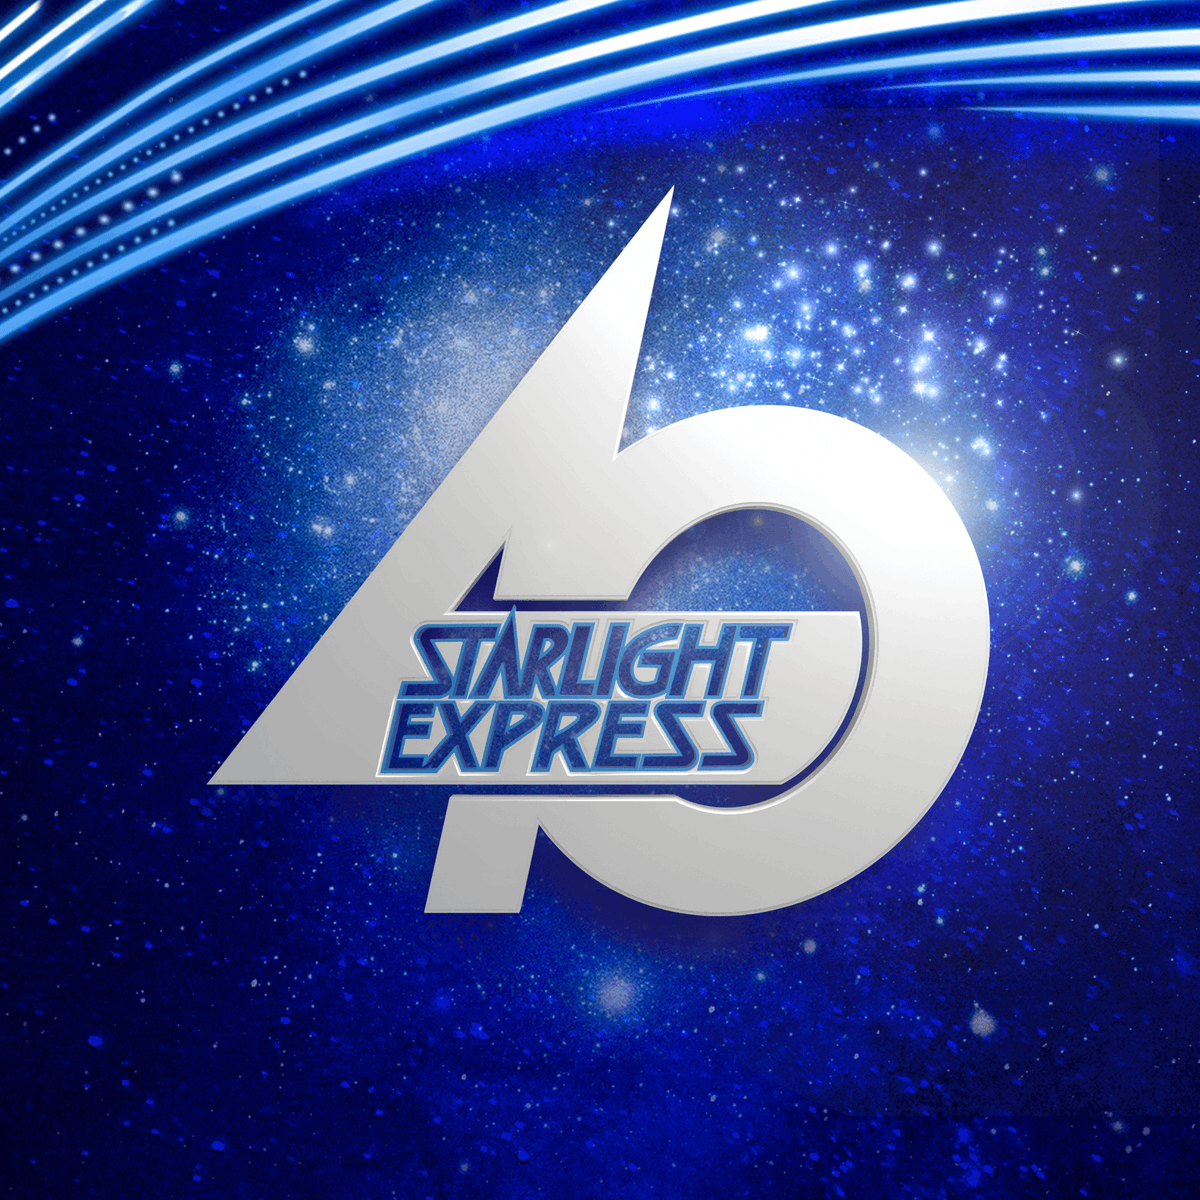 Attention passengers, the 40th anniversary of the original London production of Starlight Express is this week! 🚆 🌟 Stay tuned...👀 #StarlightExpress40 #StarlightExpress